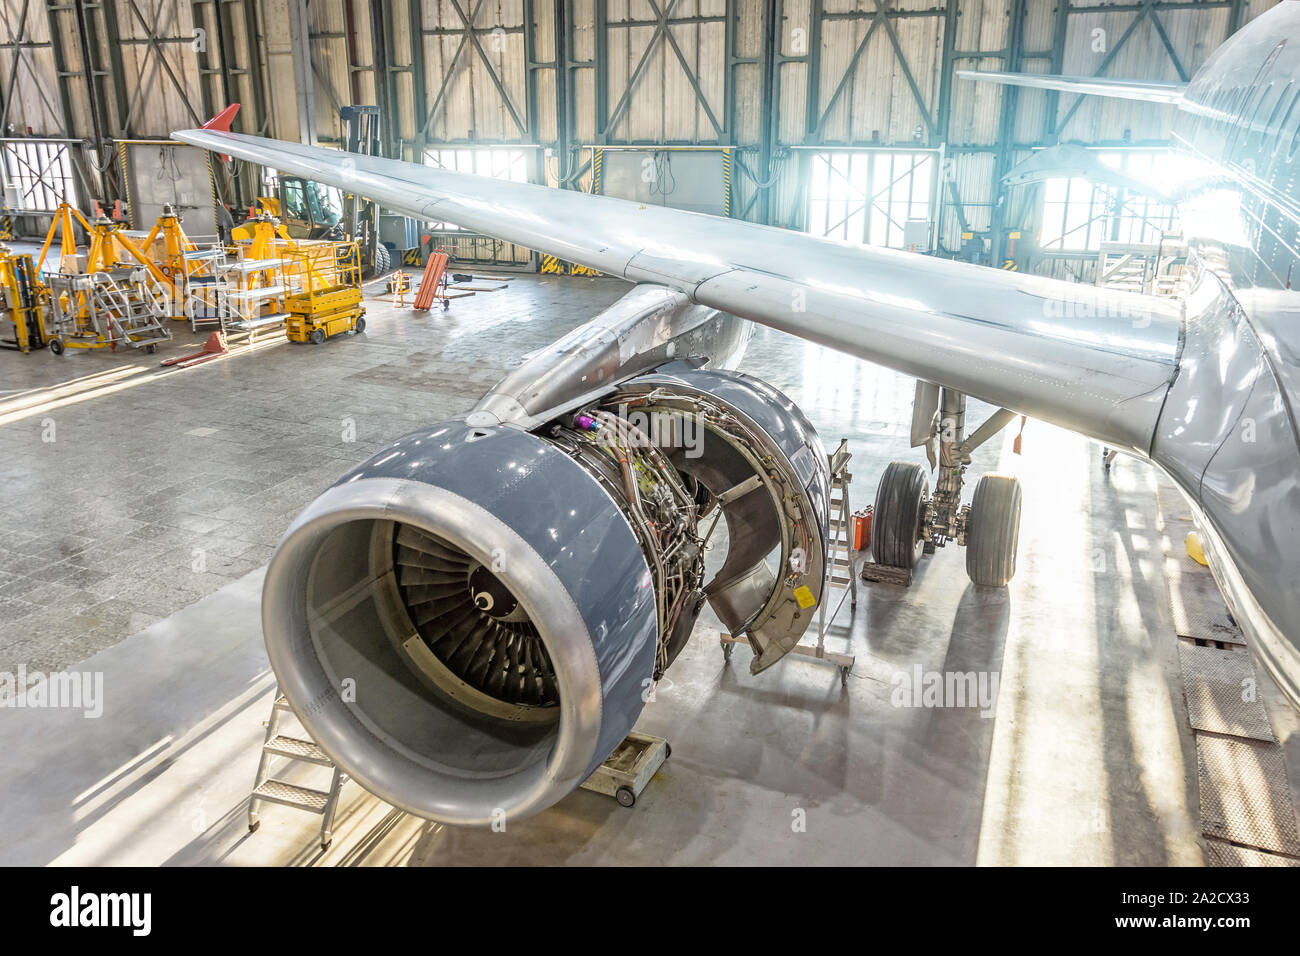 Opened aircraft engine in the hangar, maintenance. Wing view. Stock Photo